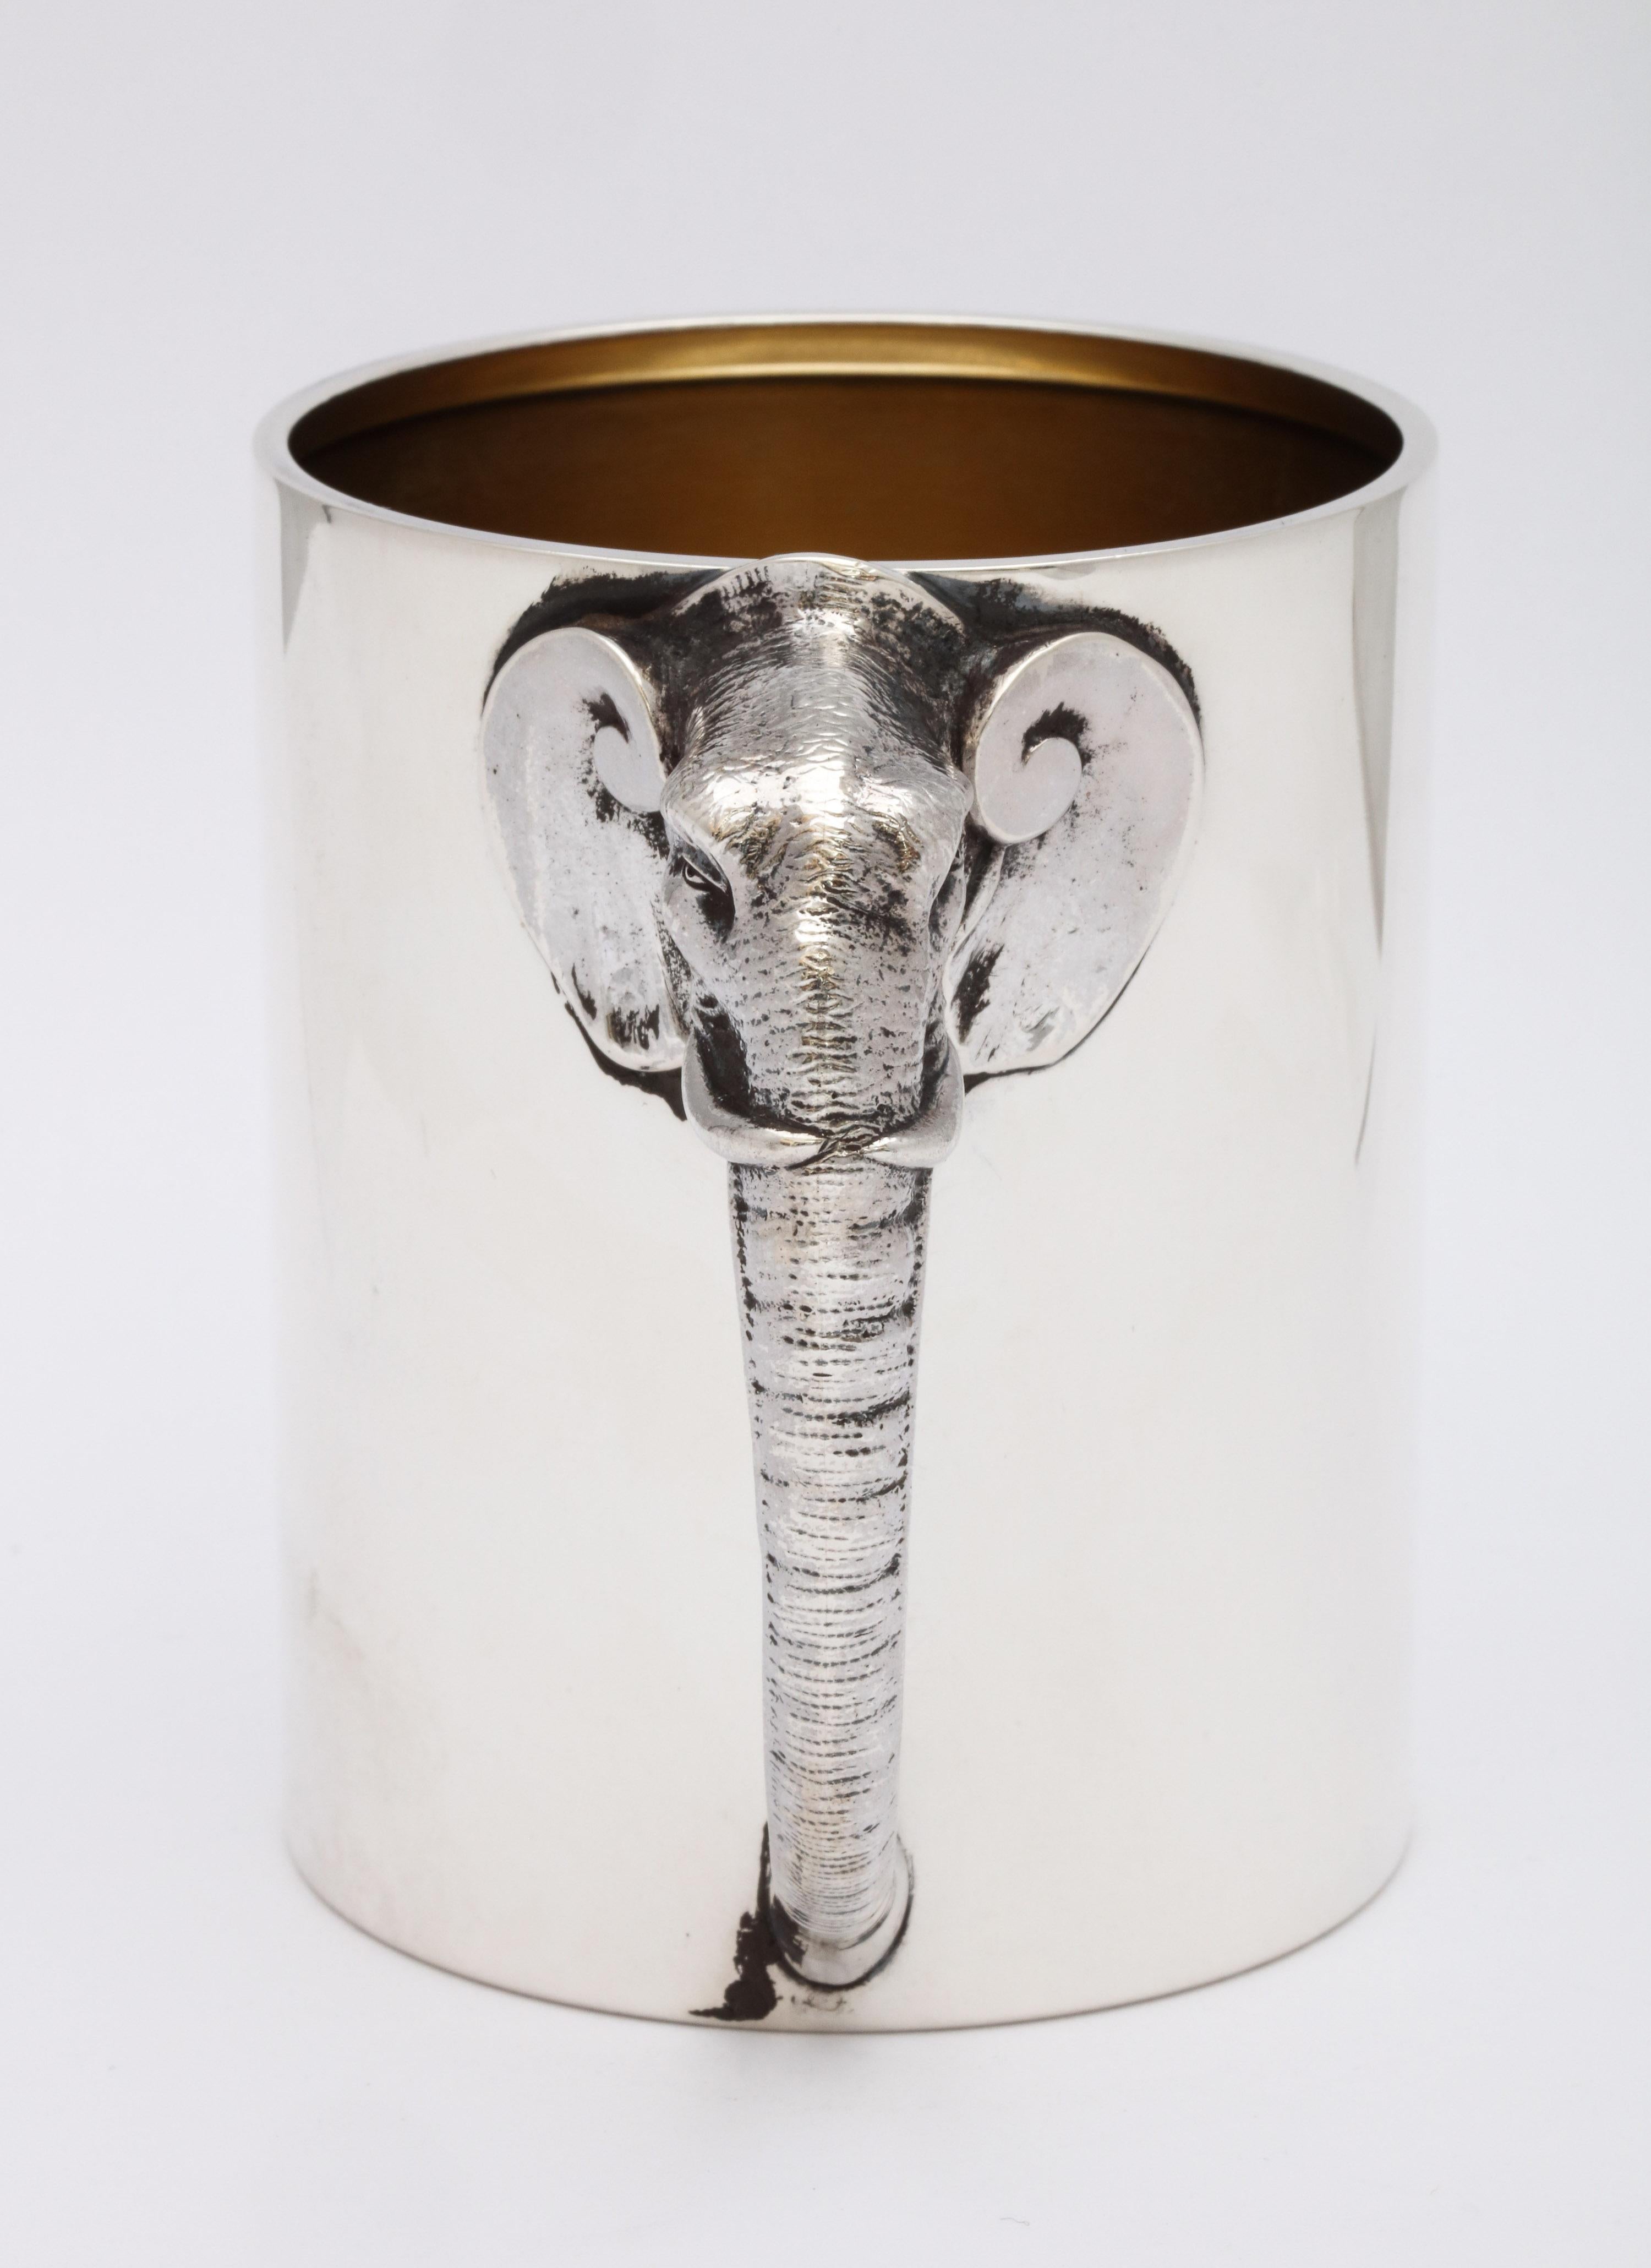 American Rare Victorian Sterling Silver Mug/Cup with Elephant-Form Handle by Gorham